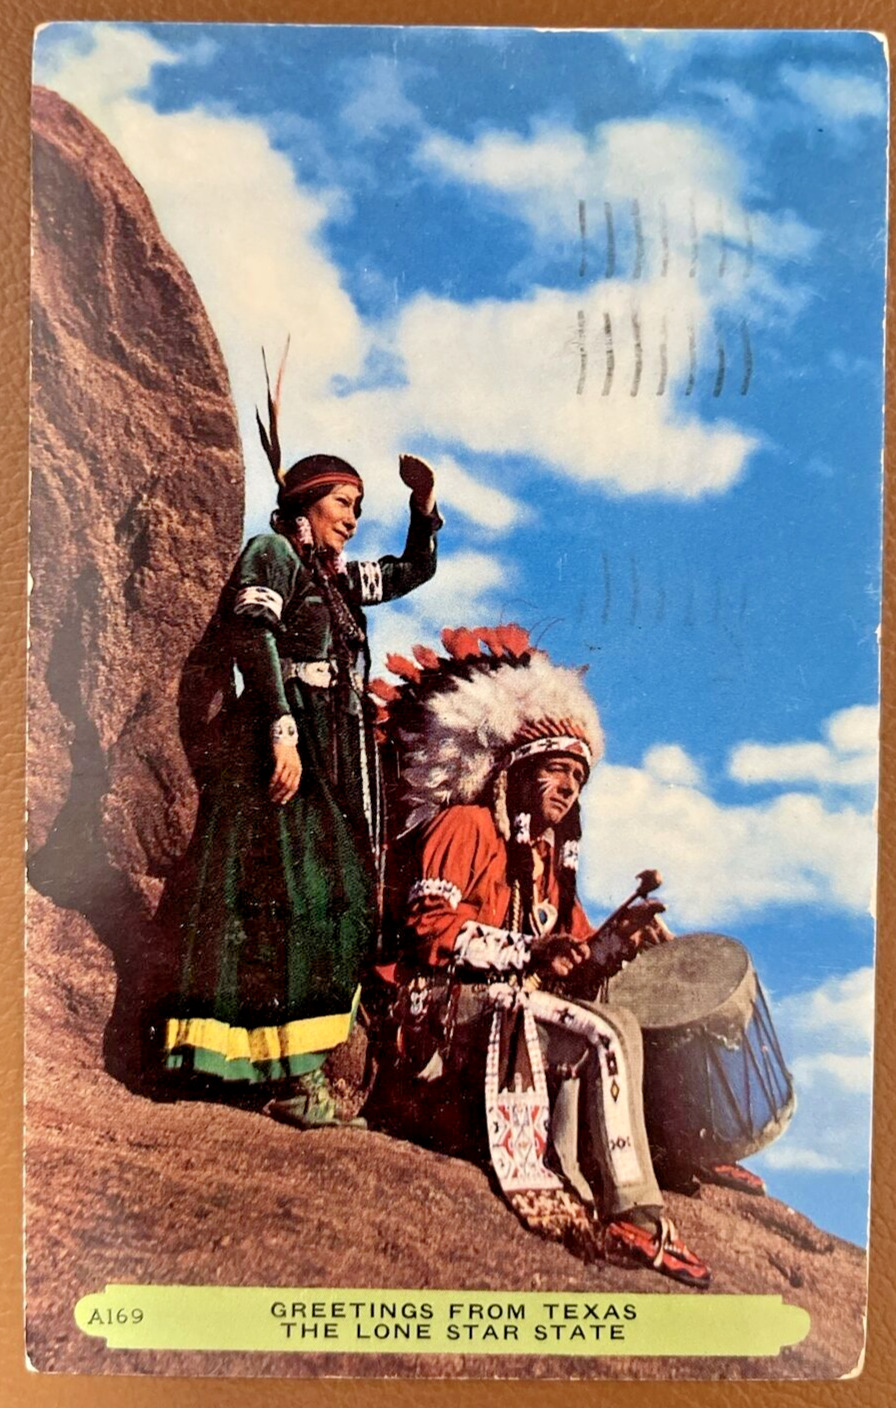 Greetings from Texas The Lone Star State VTG postcard Rain dance 1963 Chief Drum